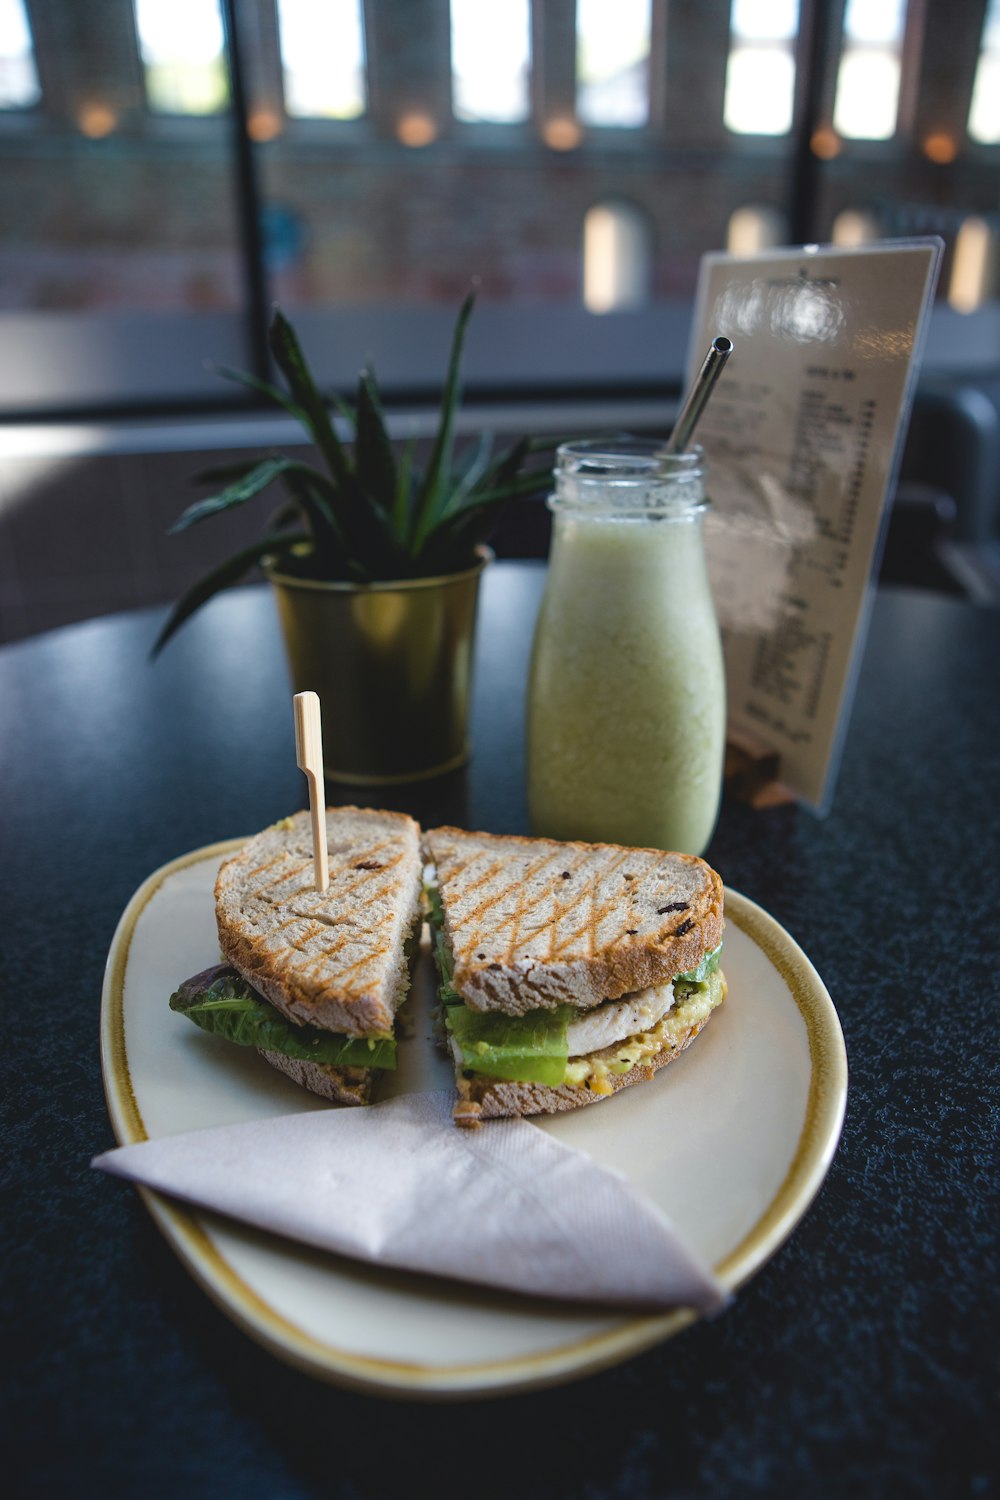 a sandwich and a jar of spread on a table